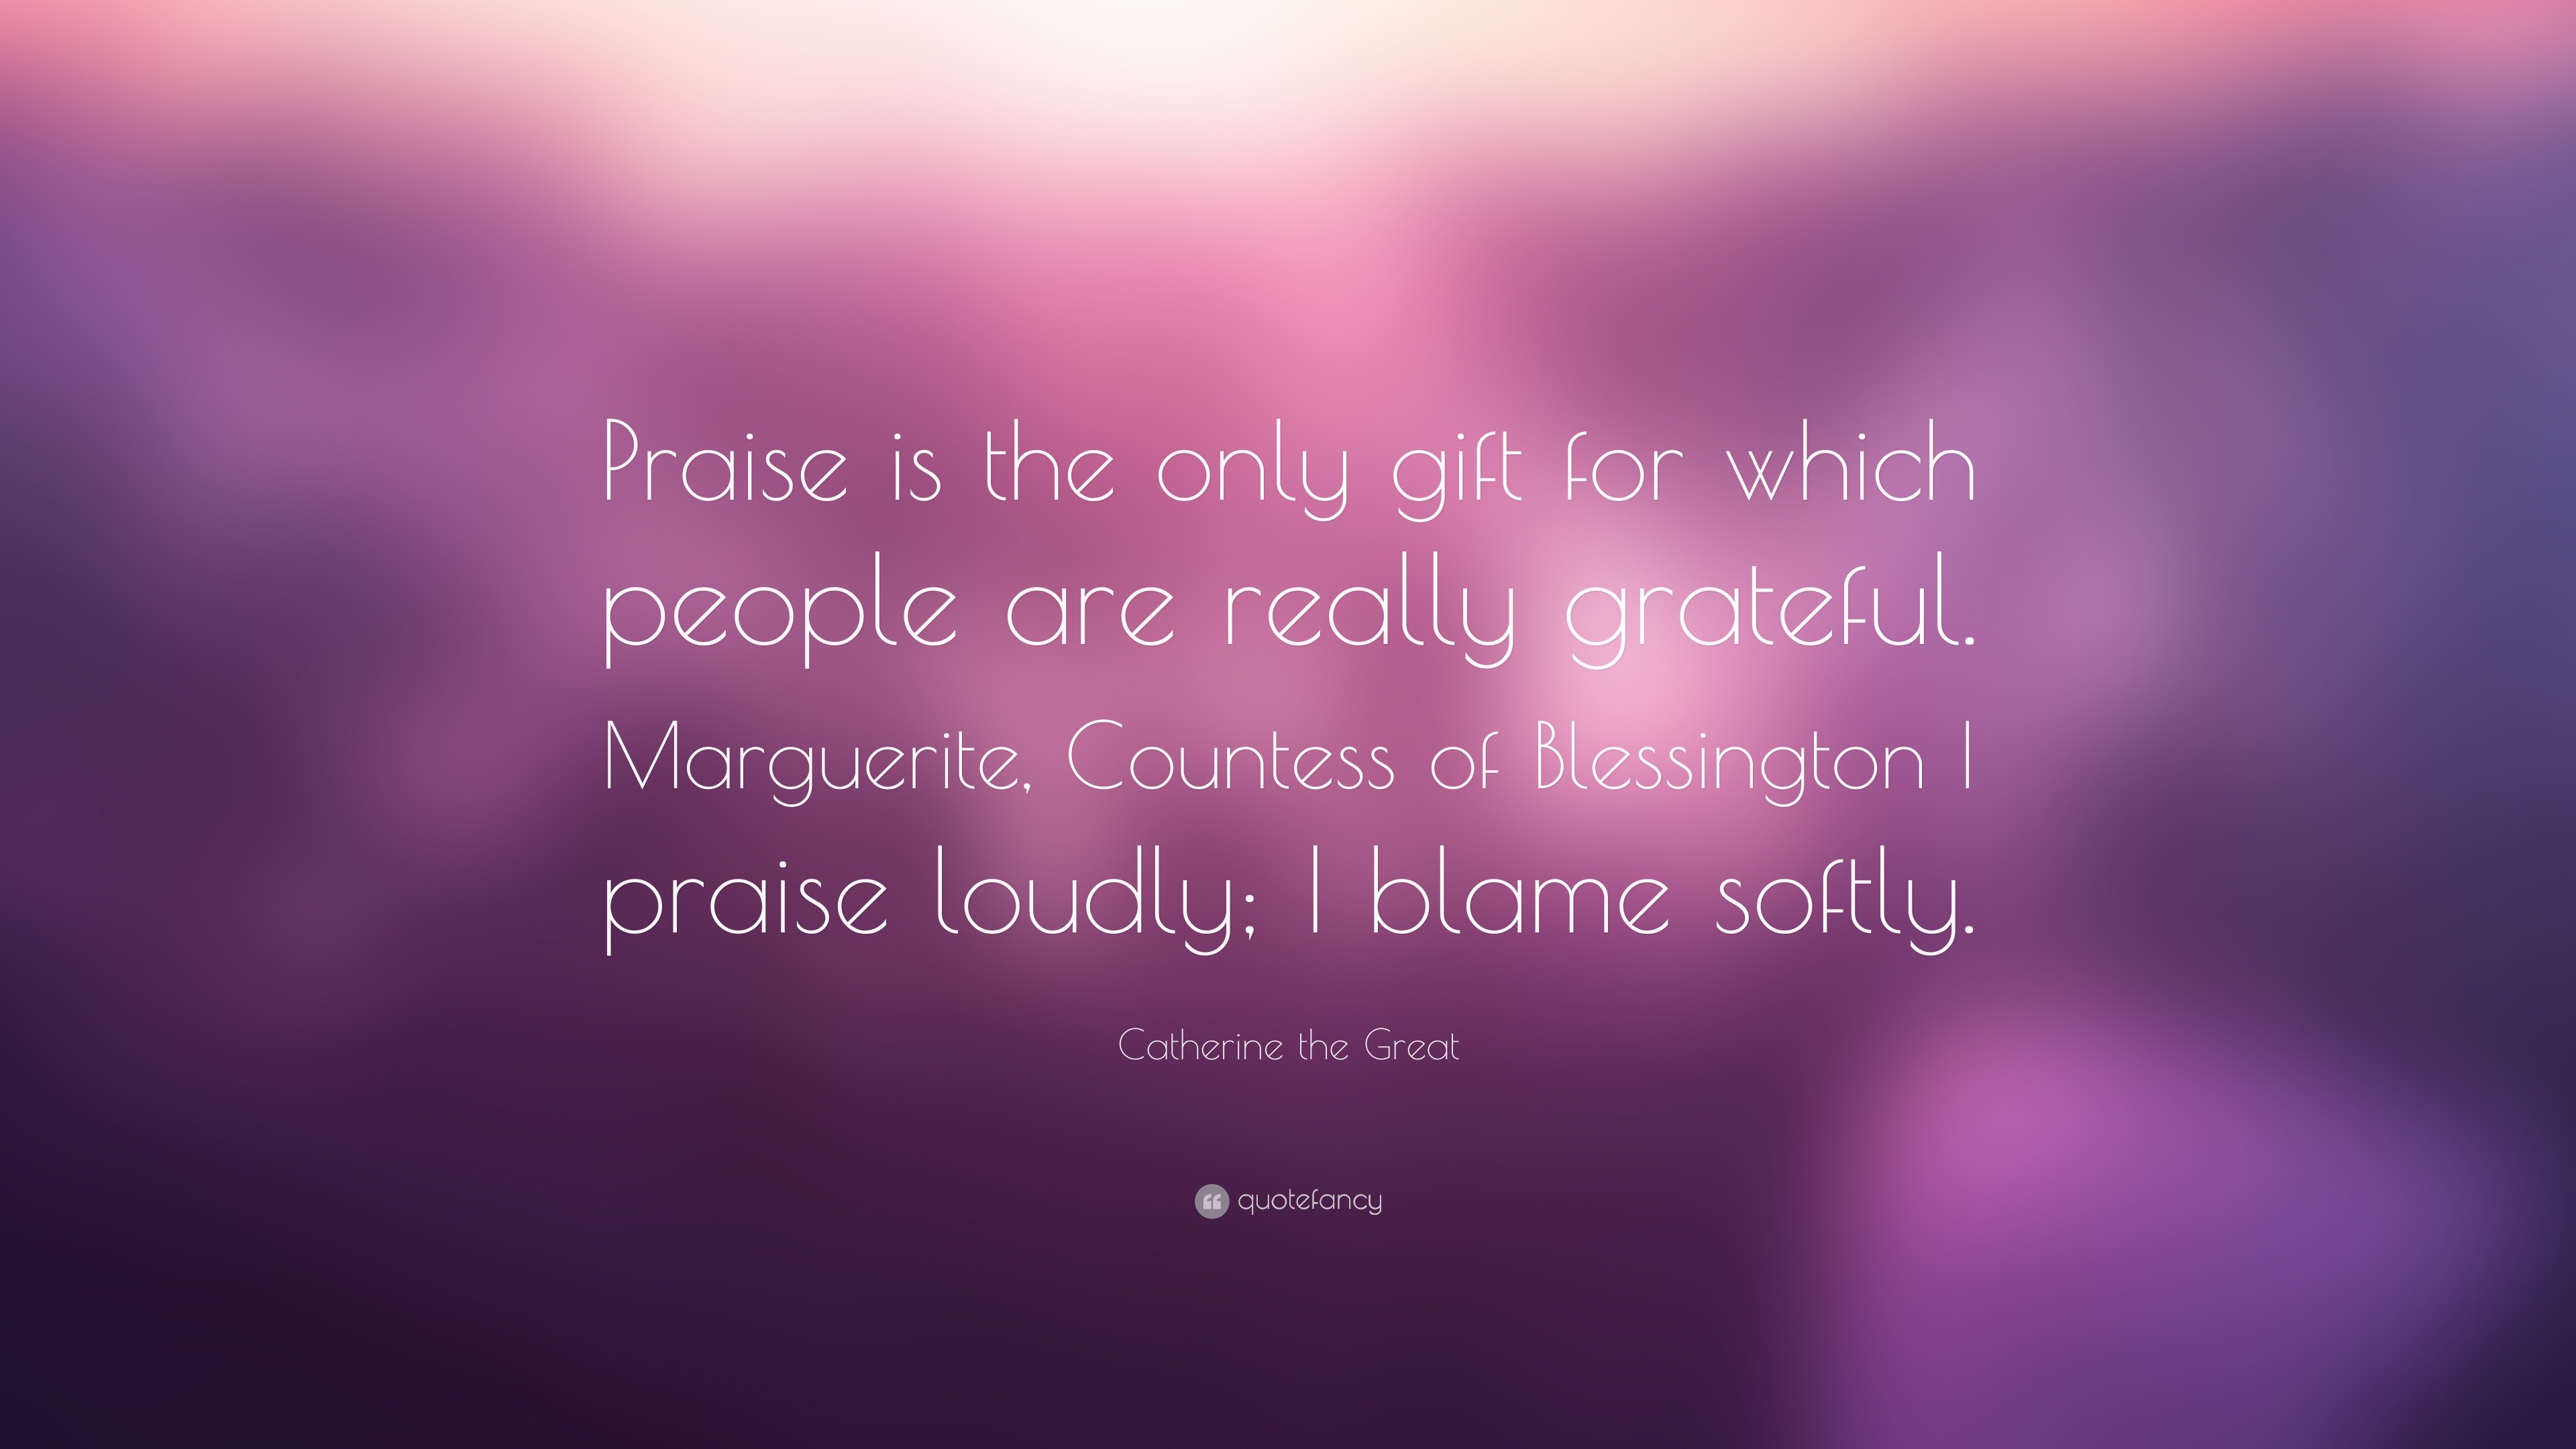 Catherine the Great Quote: “Praise is the only gift for which people ...